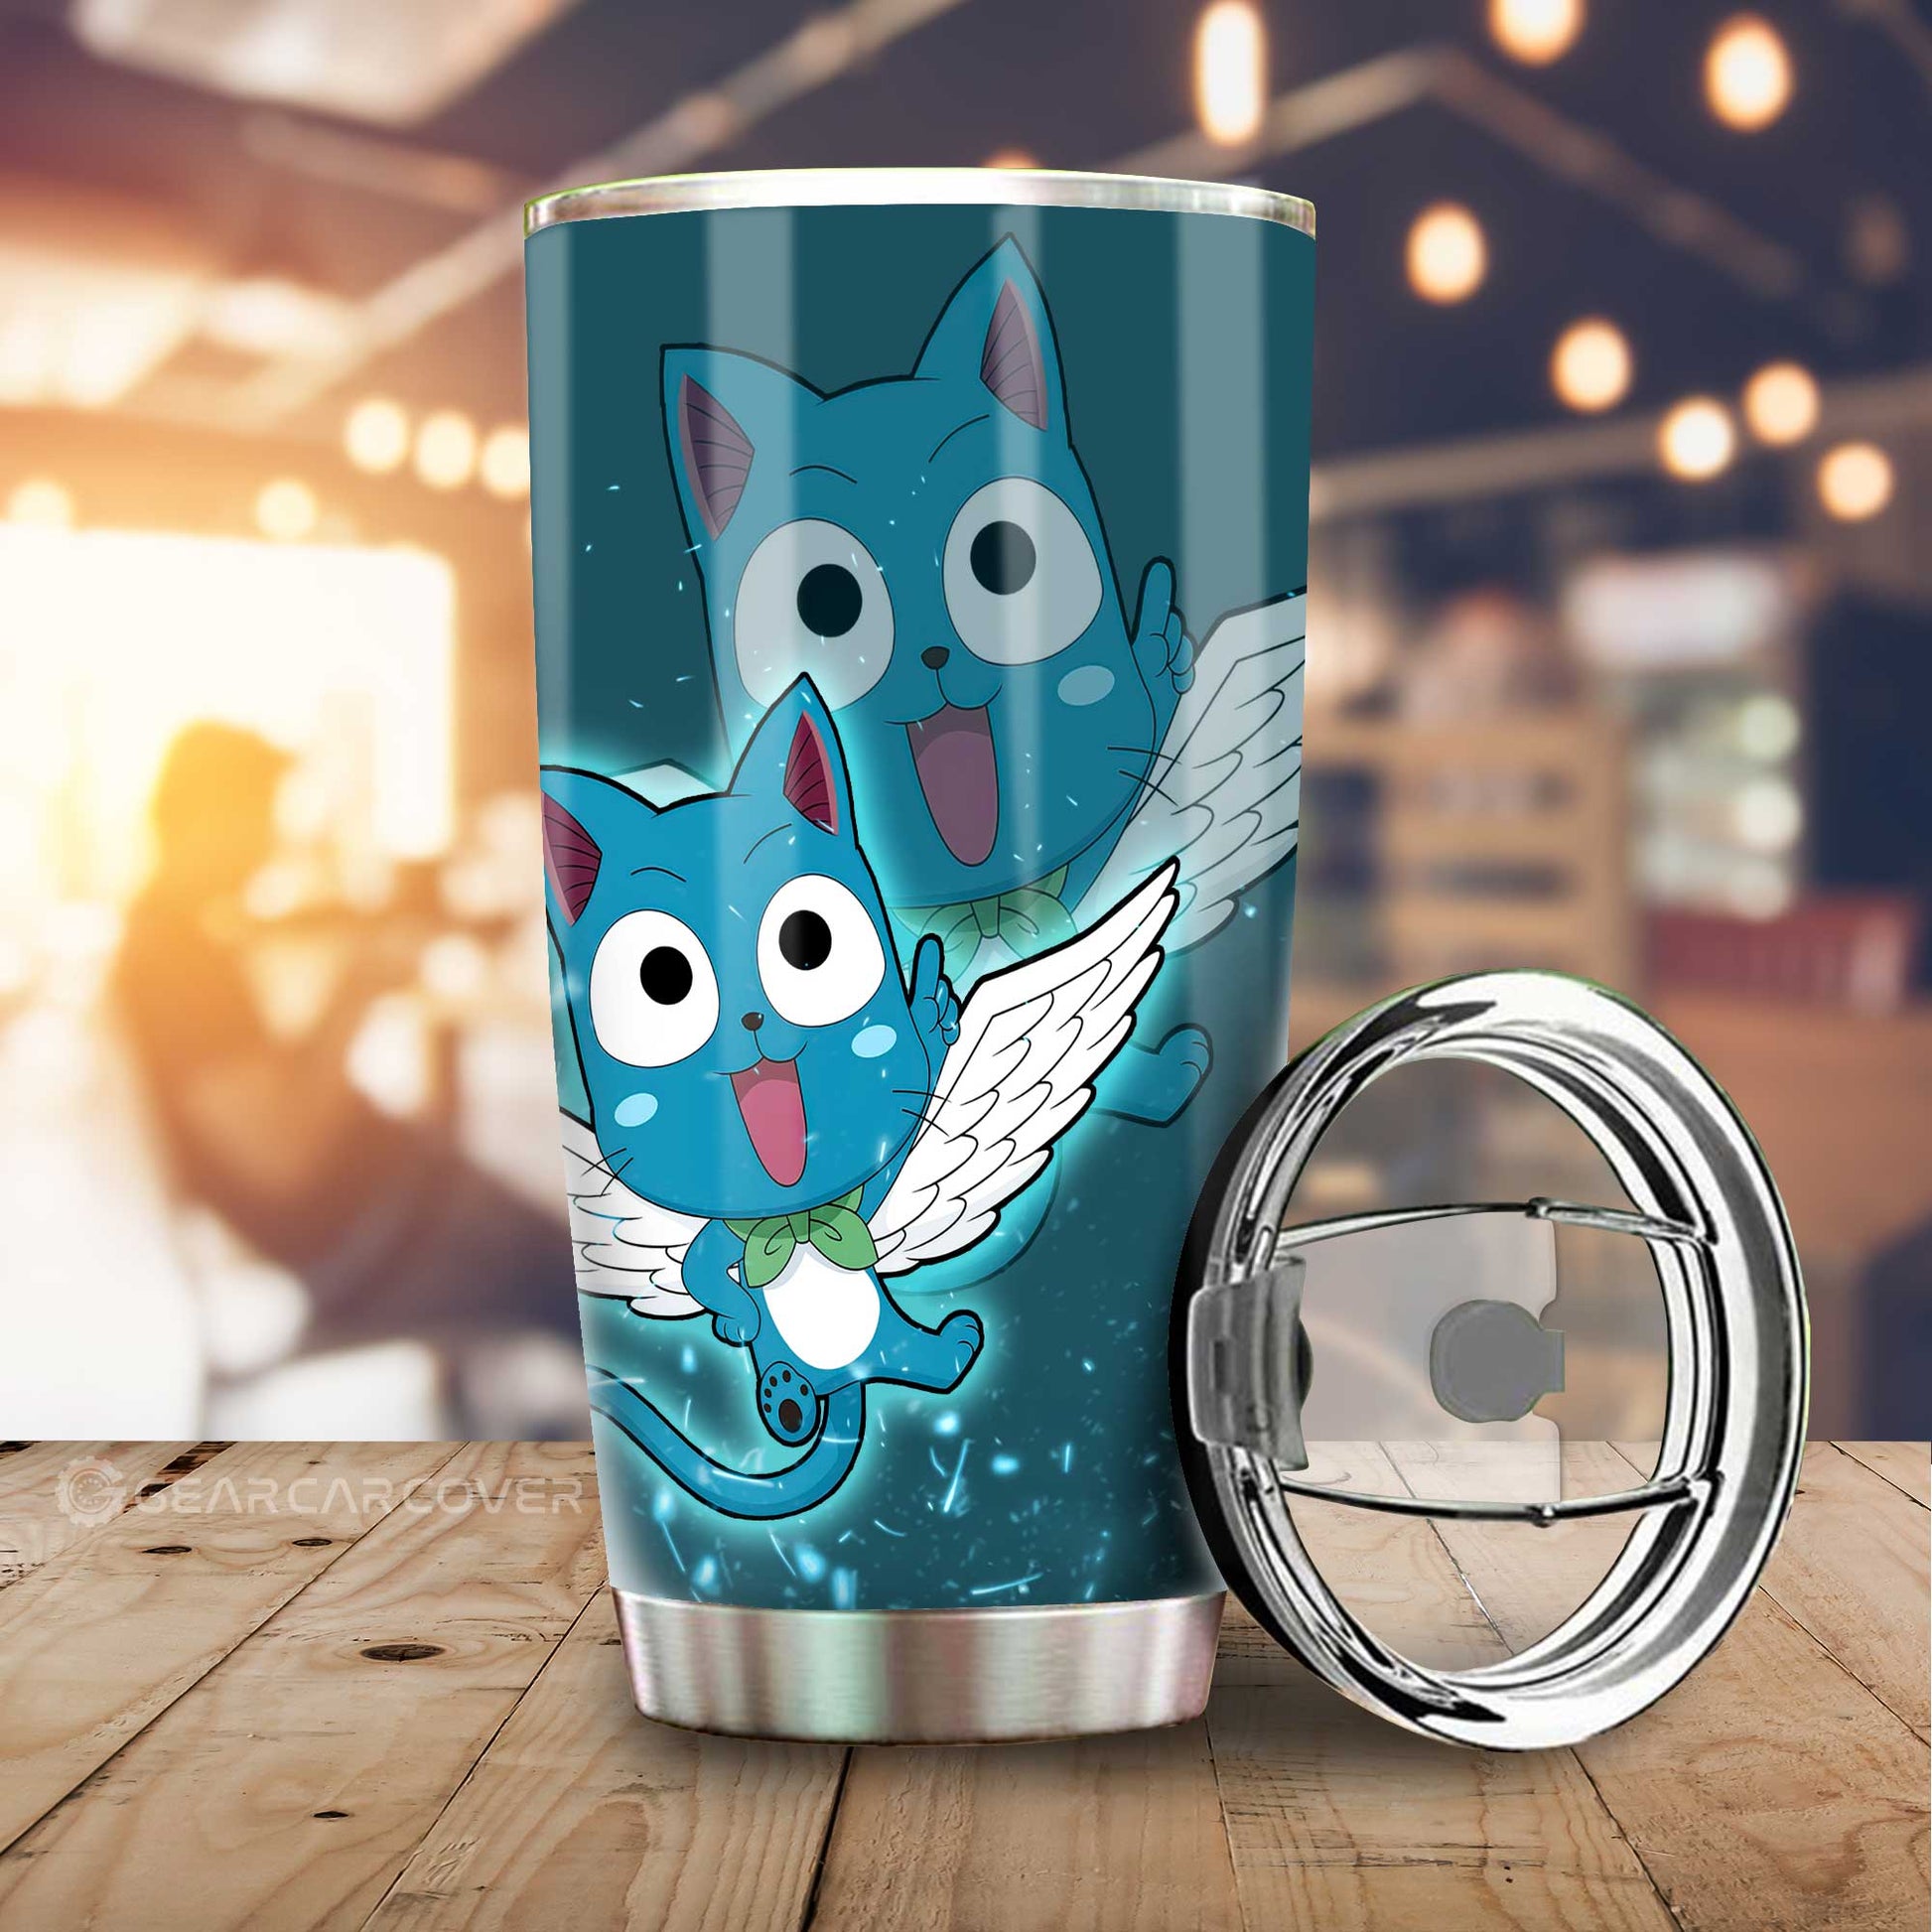 Happy Tumbler Cup Custom Fairy Tail Anime Car Accessories - Gearcarcover - 1